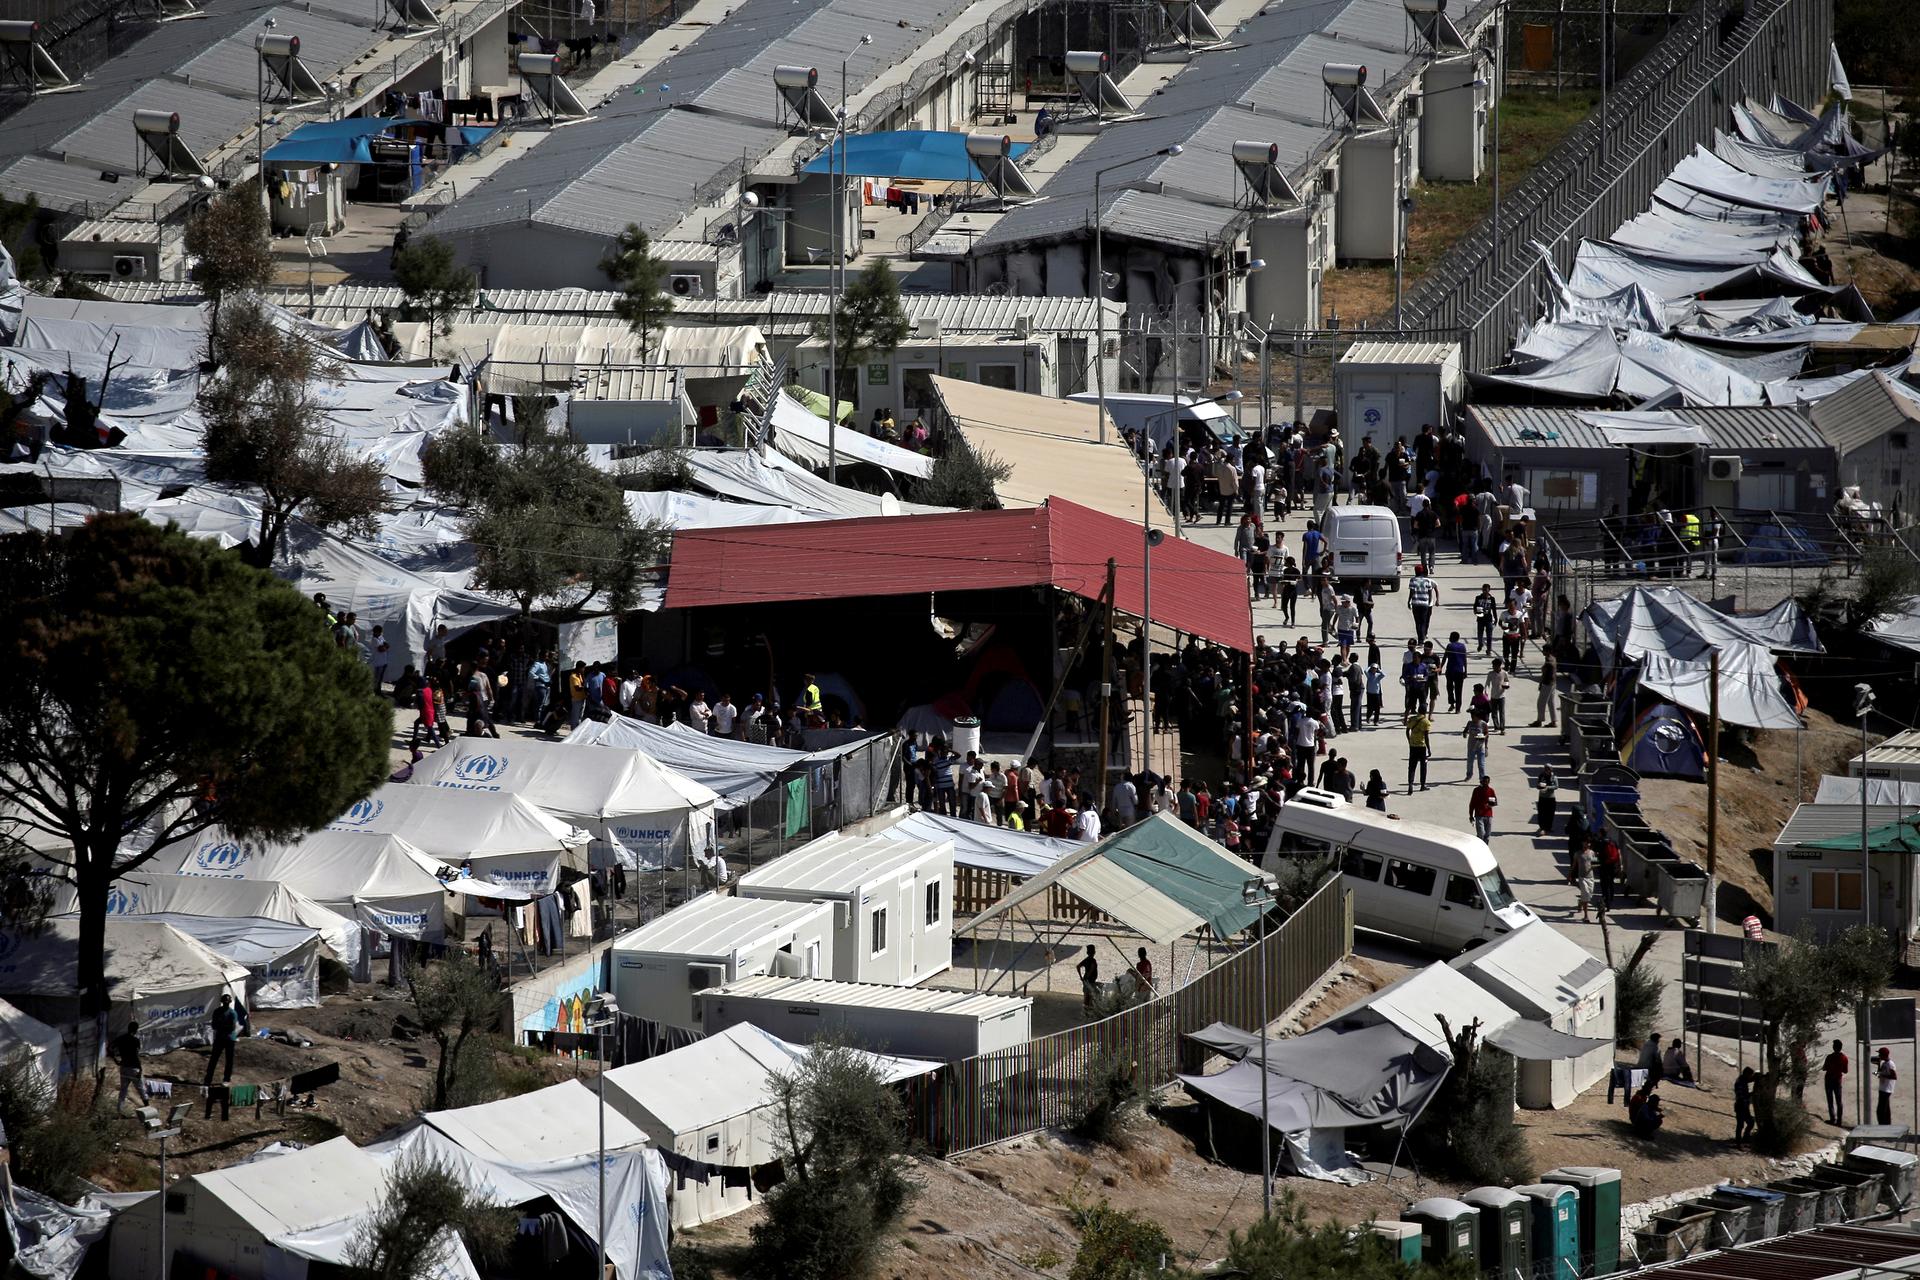 Refugees and migrants line up for food distribution at the Moria migrant camp on the island of Lesbos, Greece October 6, 2016.